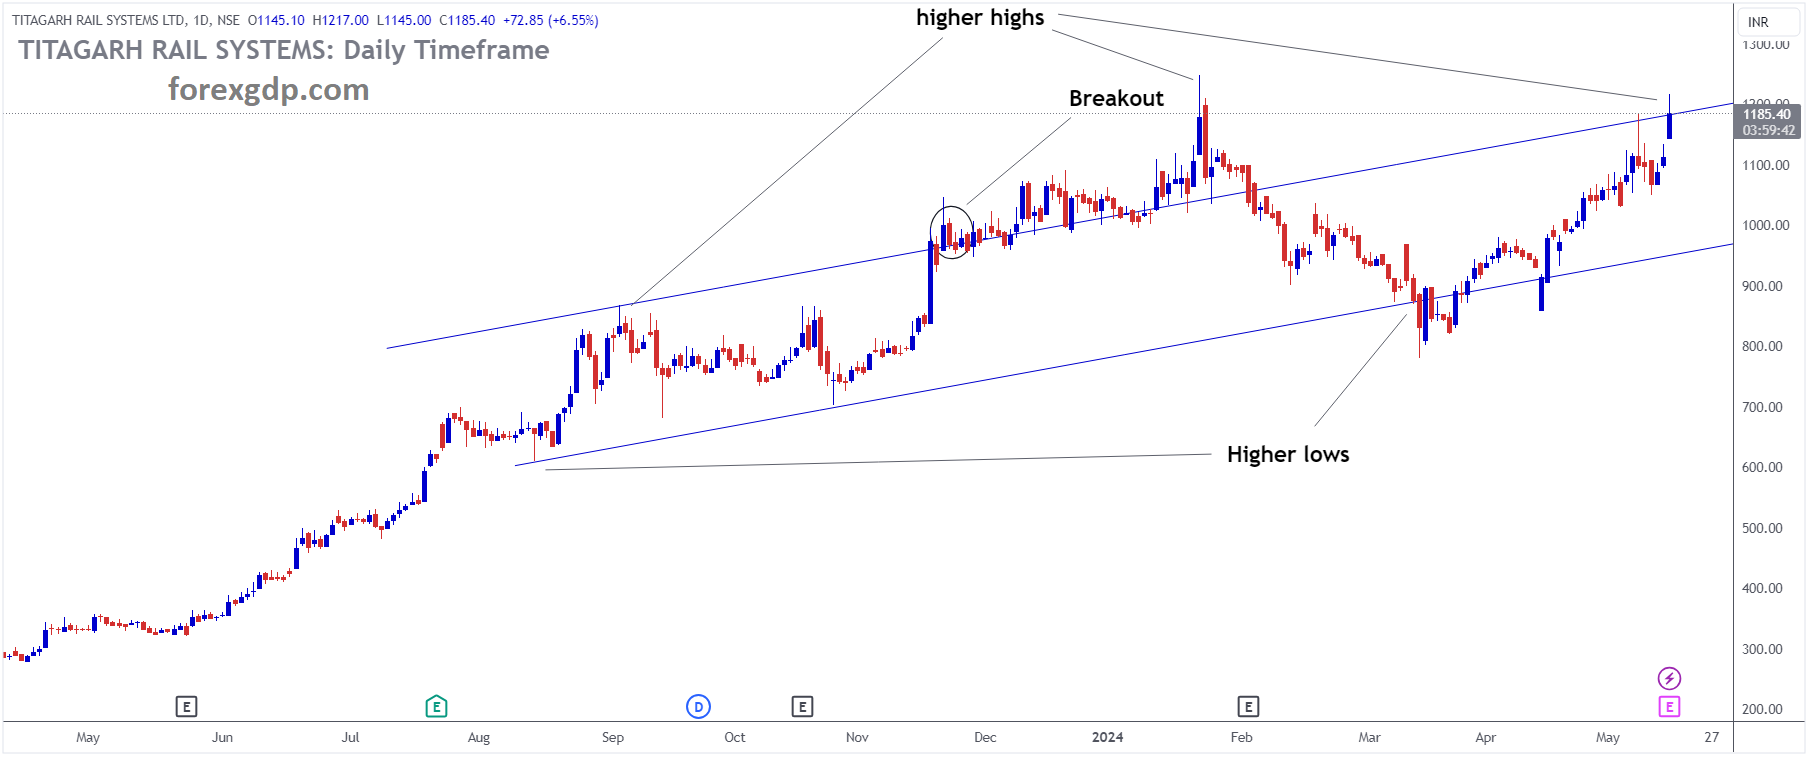 TITAGARH RAIL SYSTEMS Market price is moving in Ascending channel and market has reached higher high area of the channel